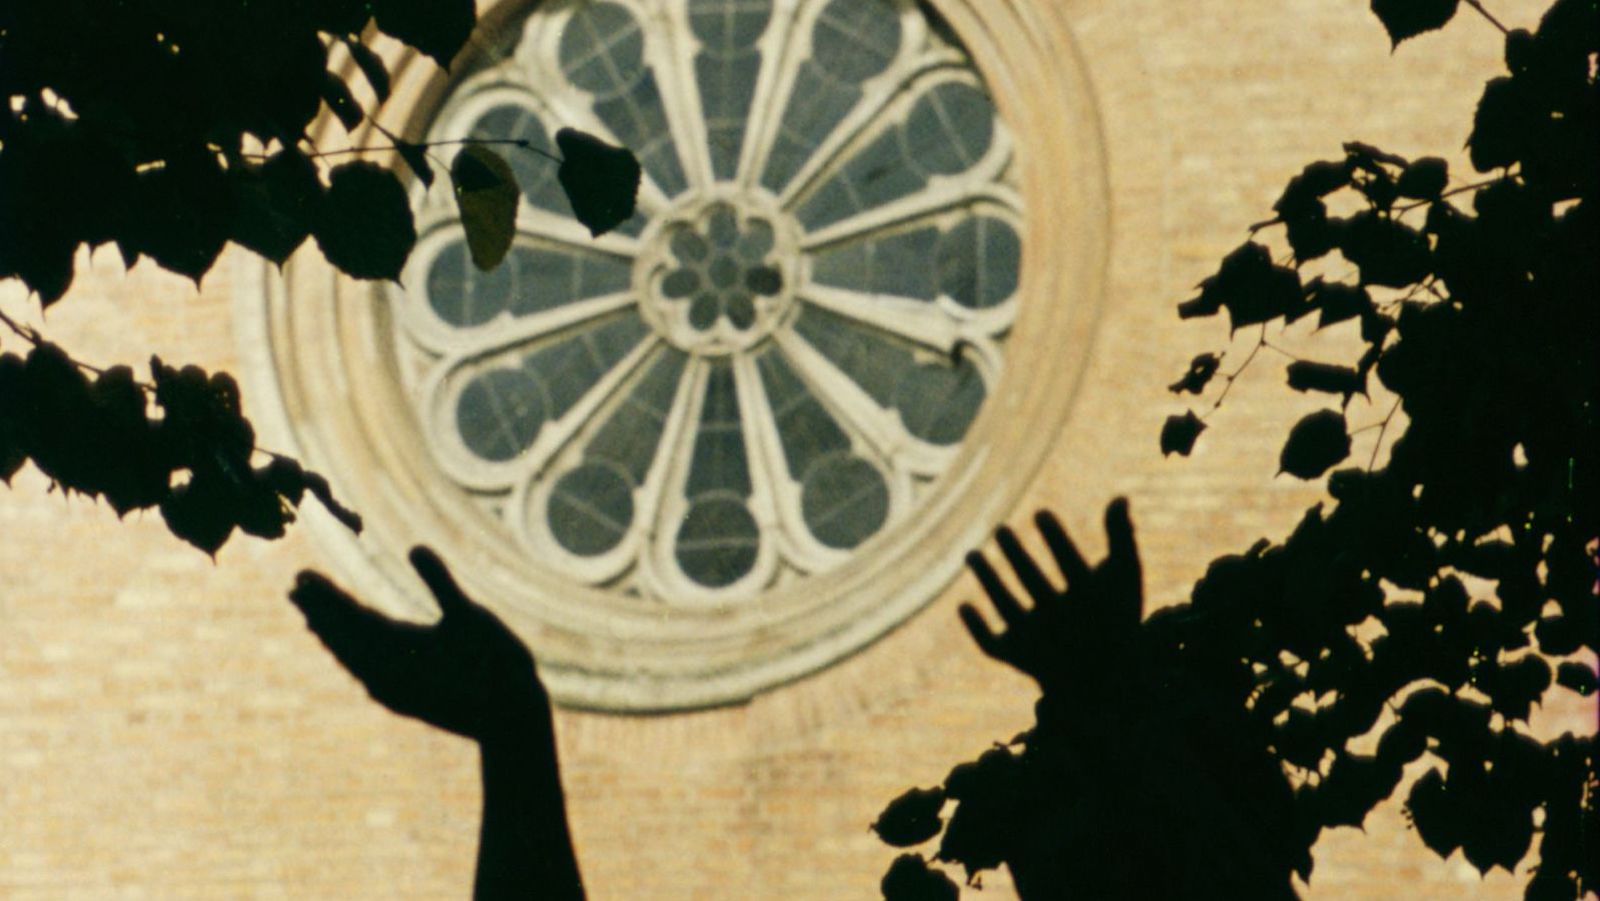 silhouettes of hands reaching for a church window